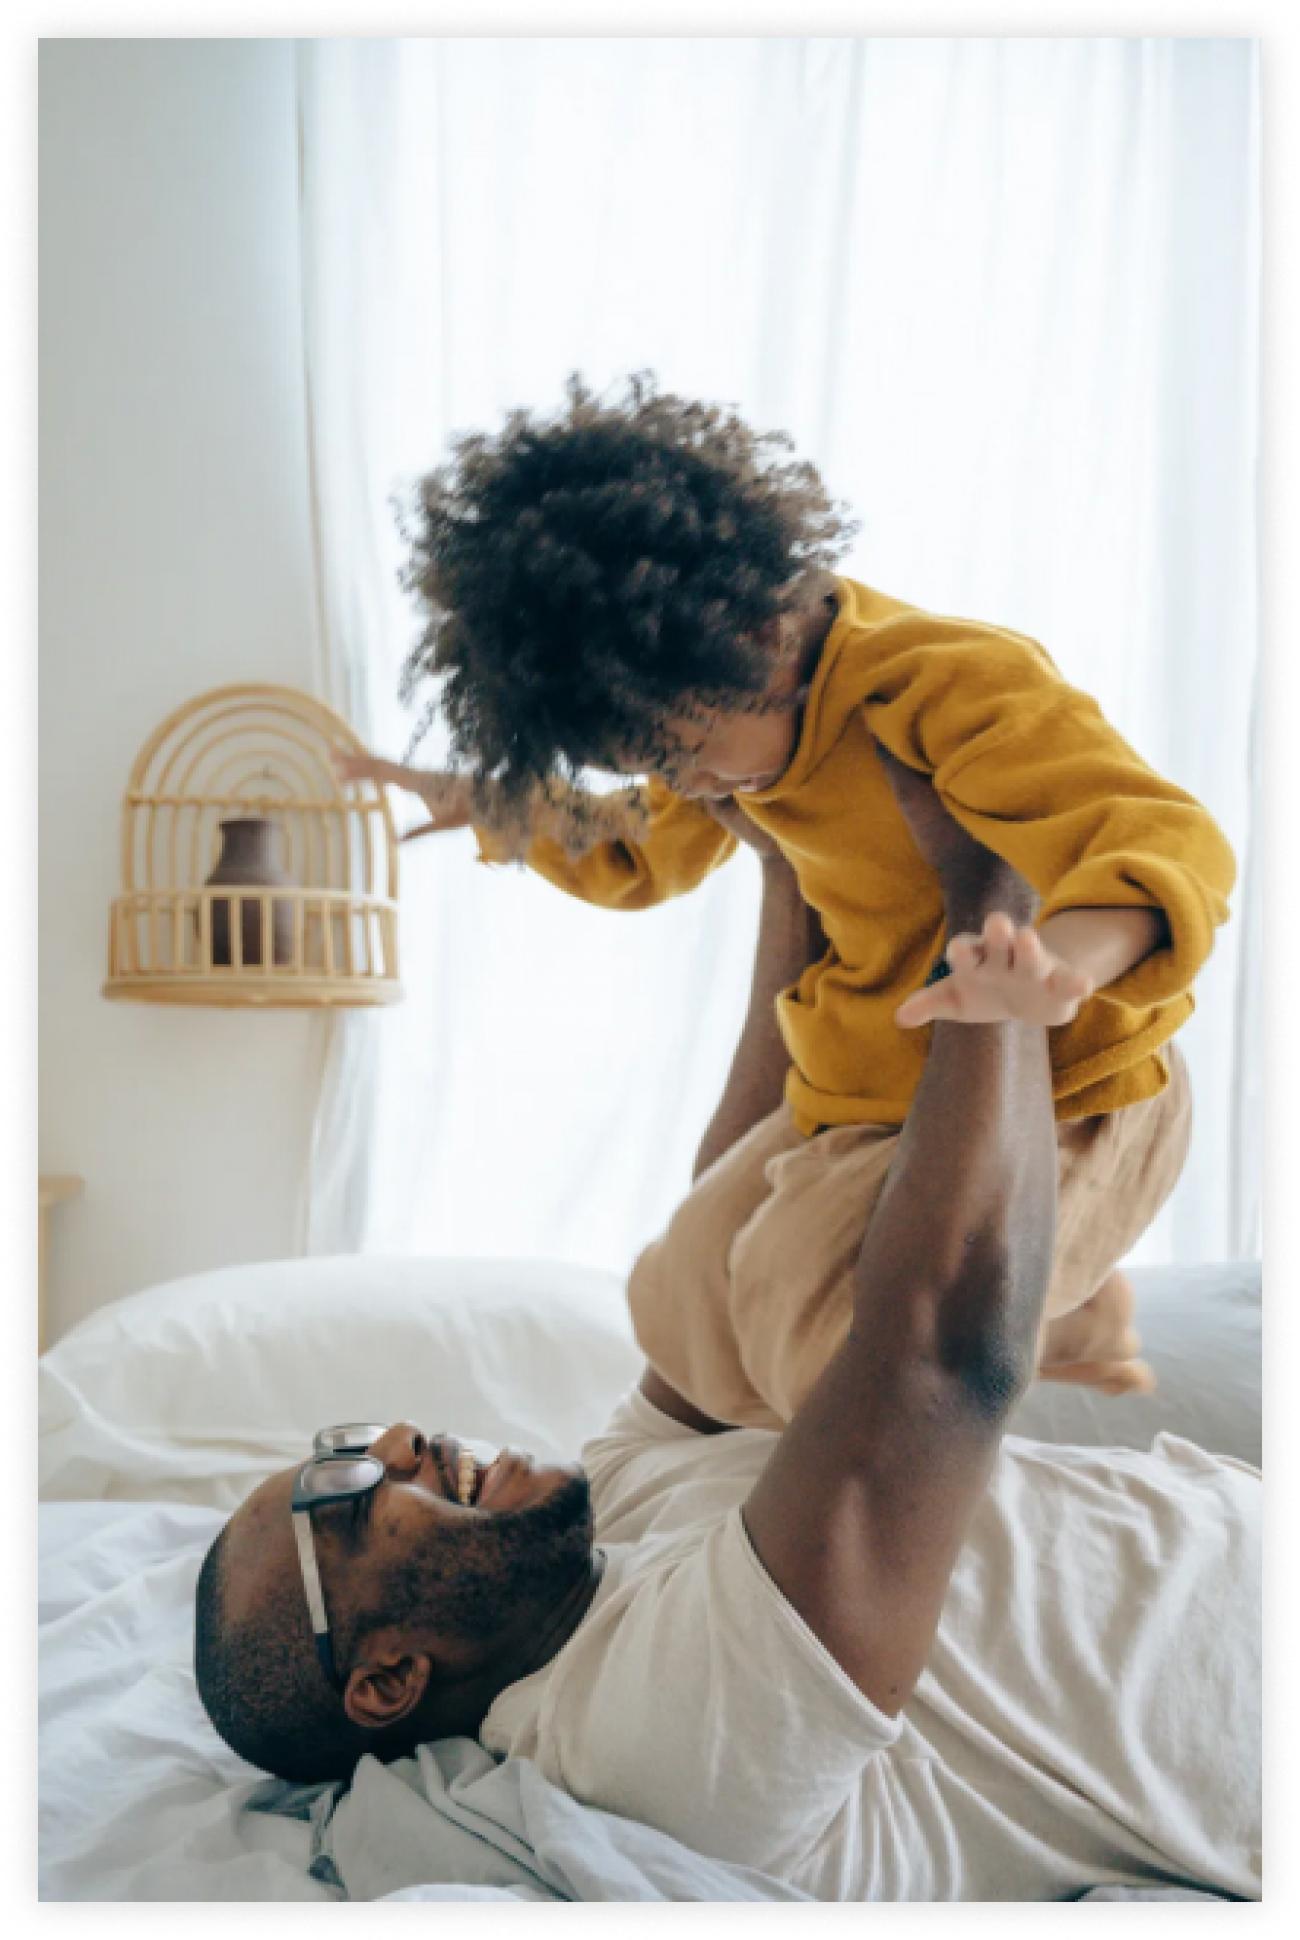 Dad lifting young child up while laying in bed